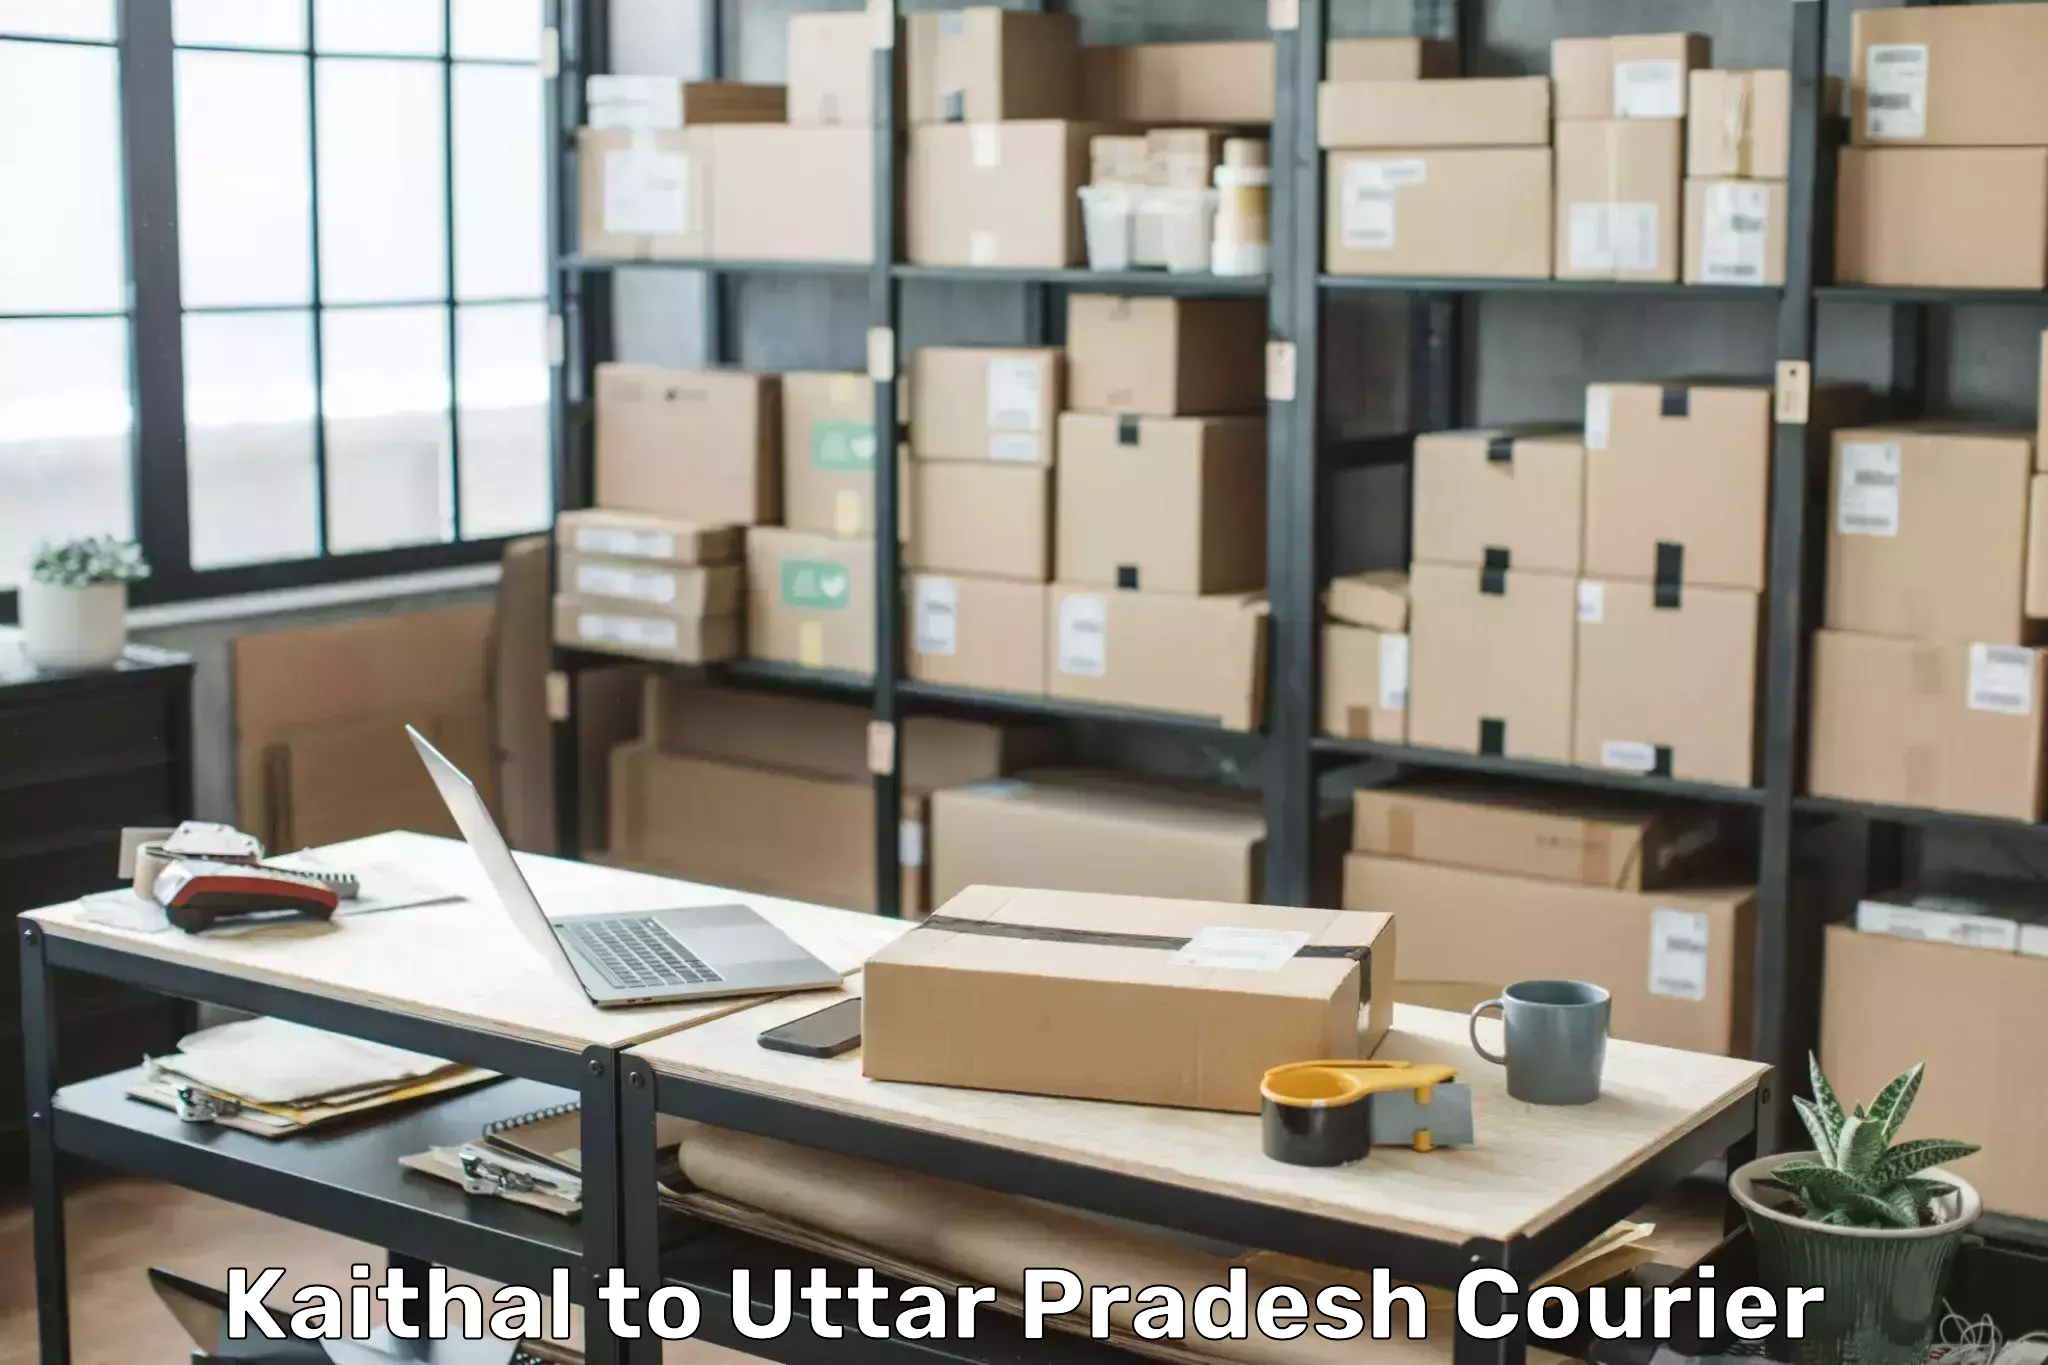 Baggage transport network Kaithal to Utraula